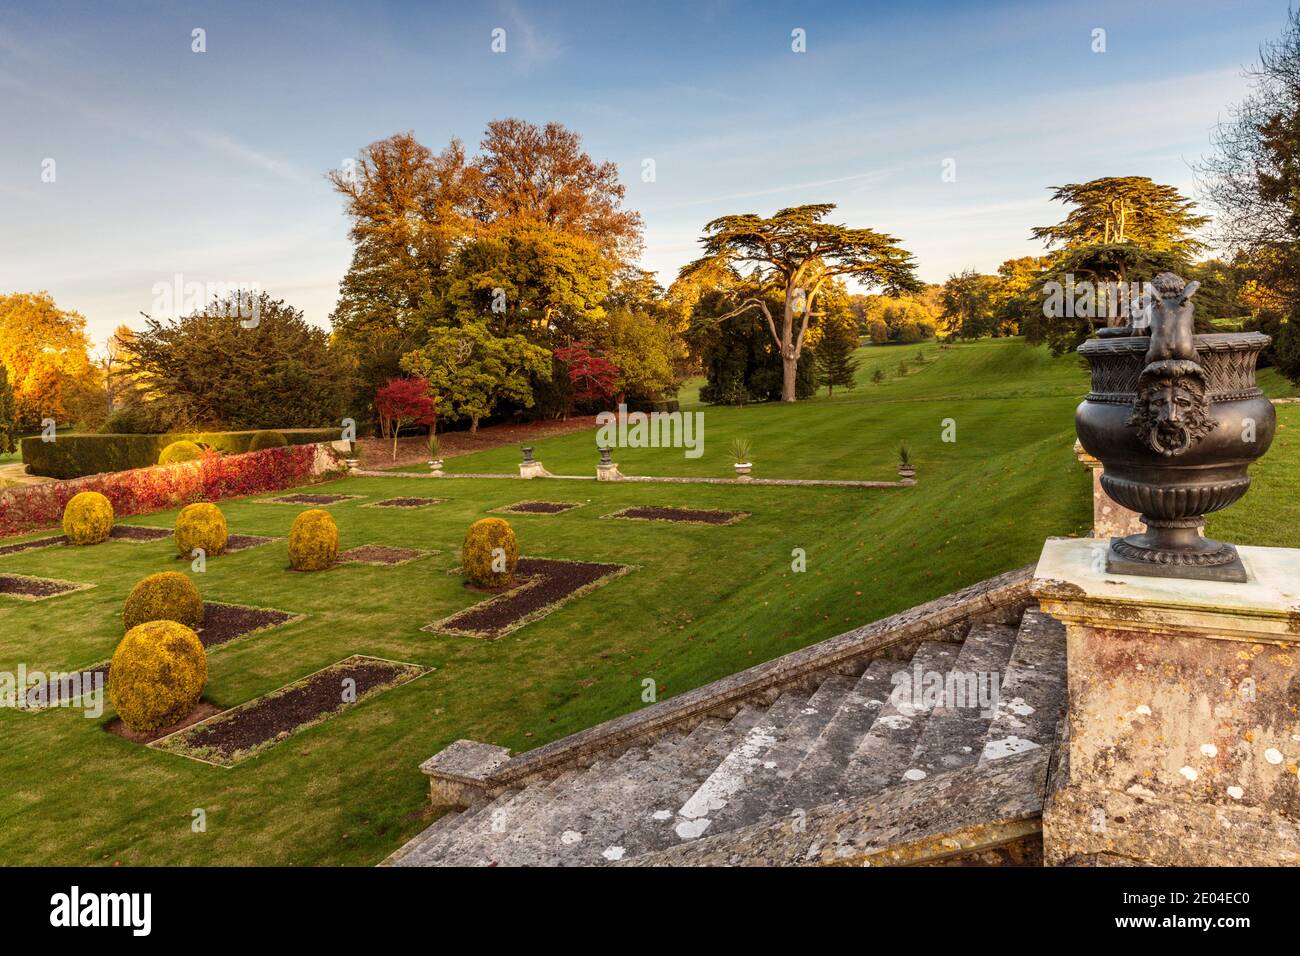 The gardens of Kingston Lacy, a country house and estate near Wimborne Minster, Dorset. Stock Photo